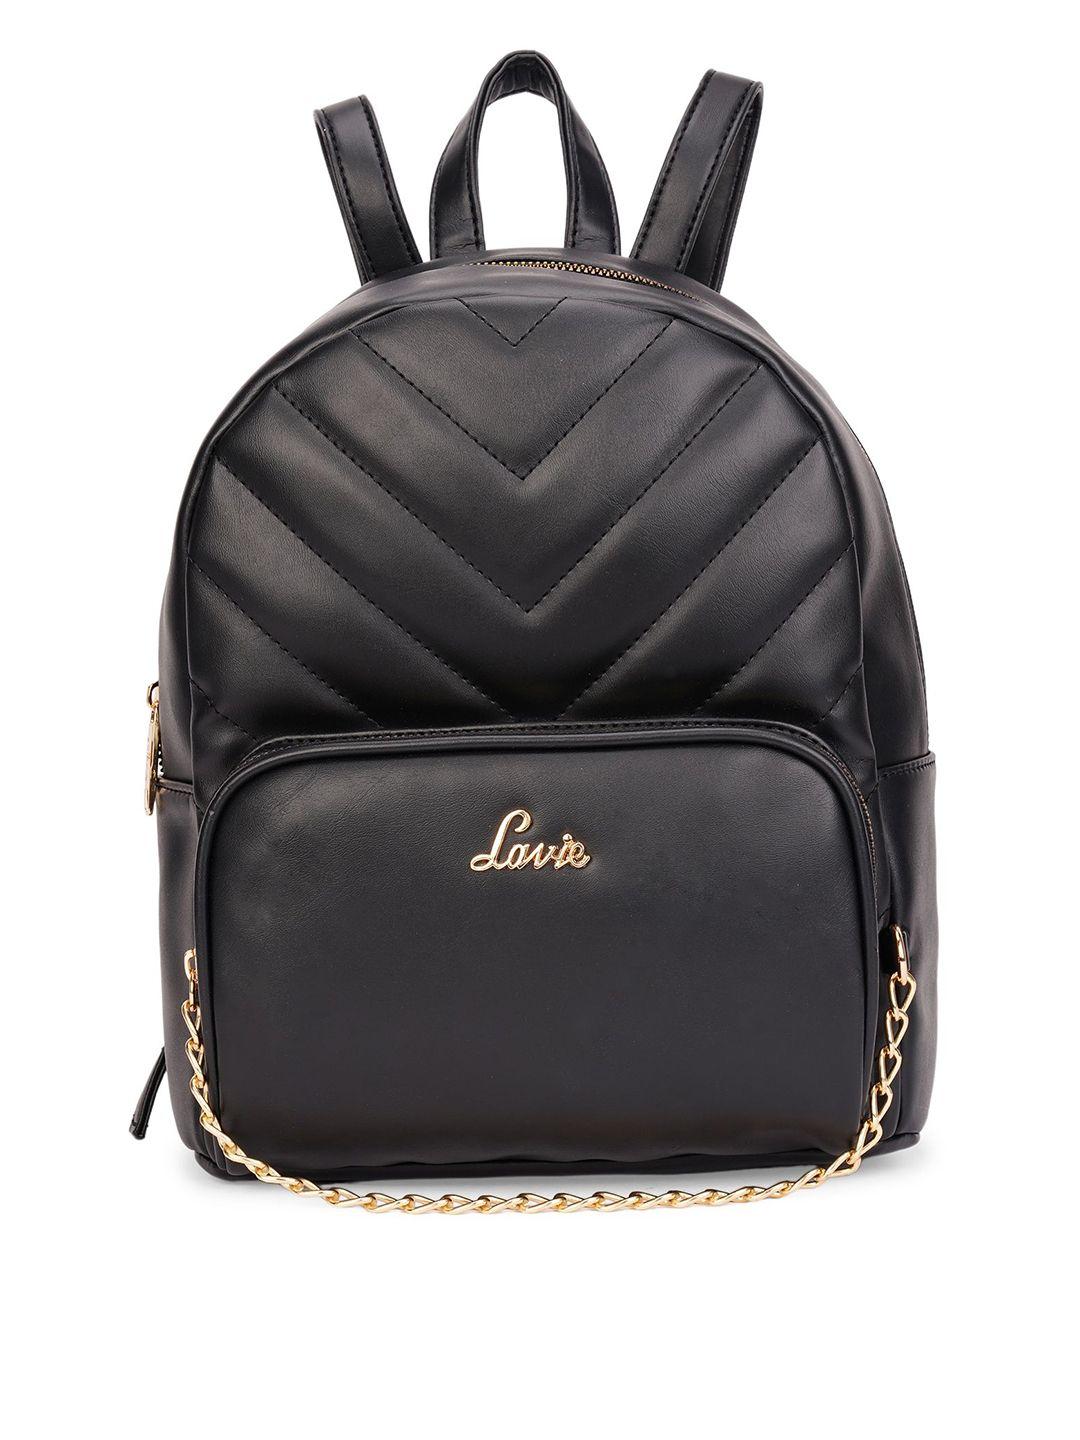 lavie textured synthetic leather backpack